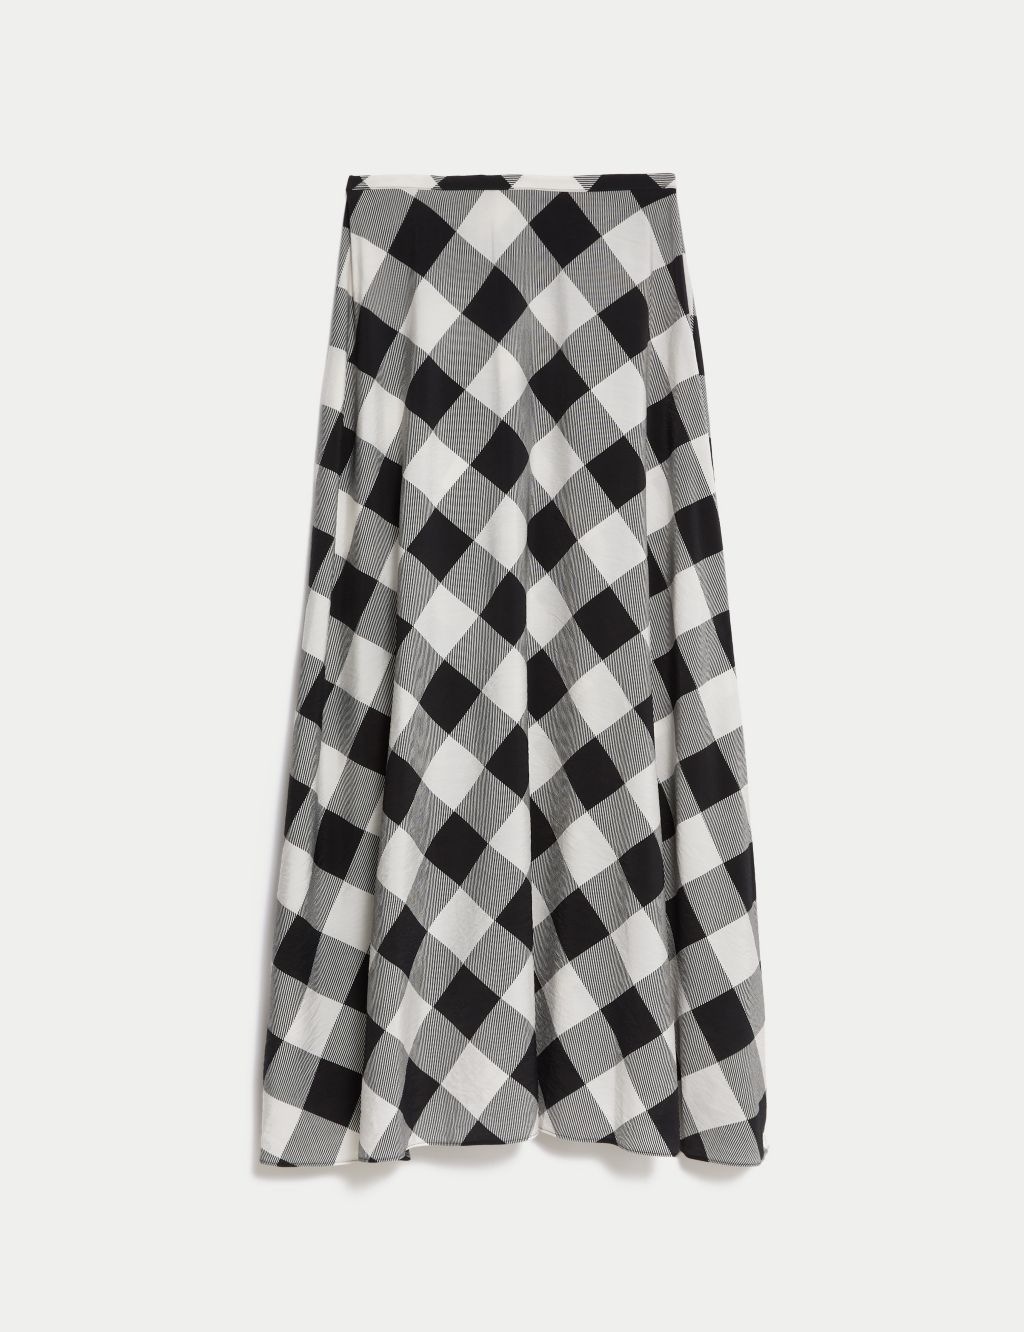 Checked Maxi A-Line Skirt image 2